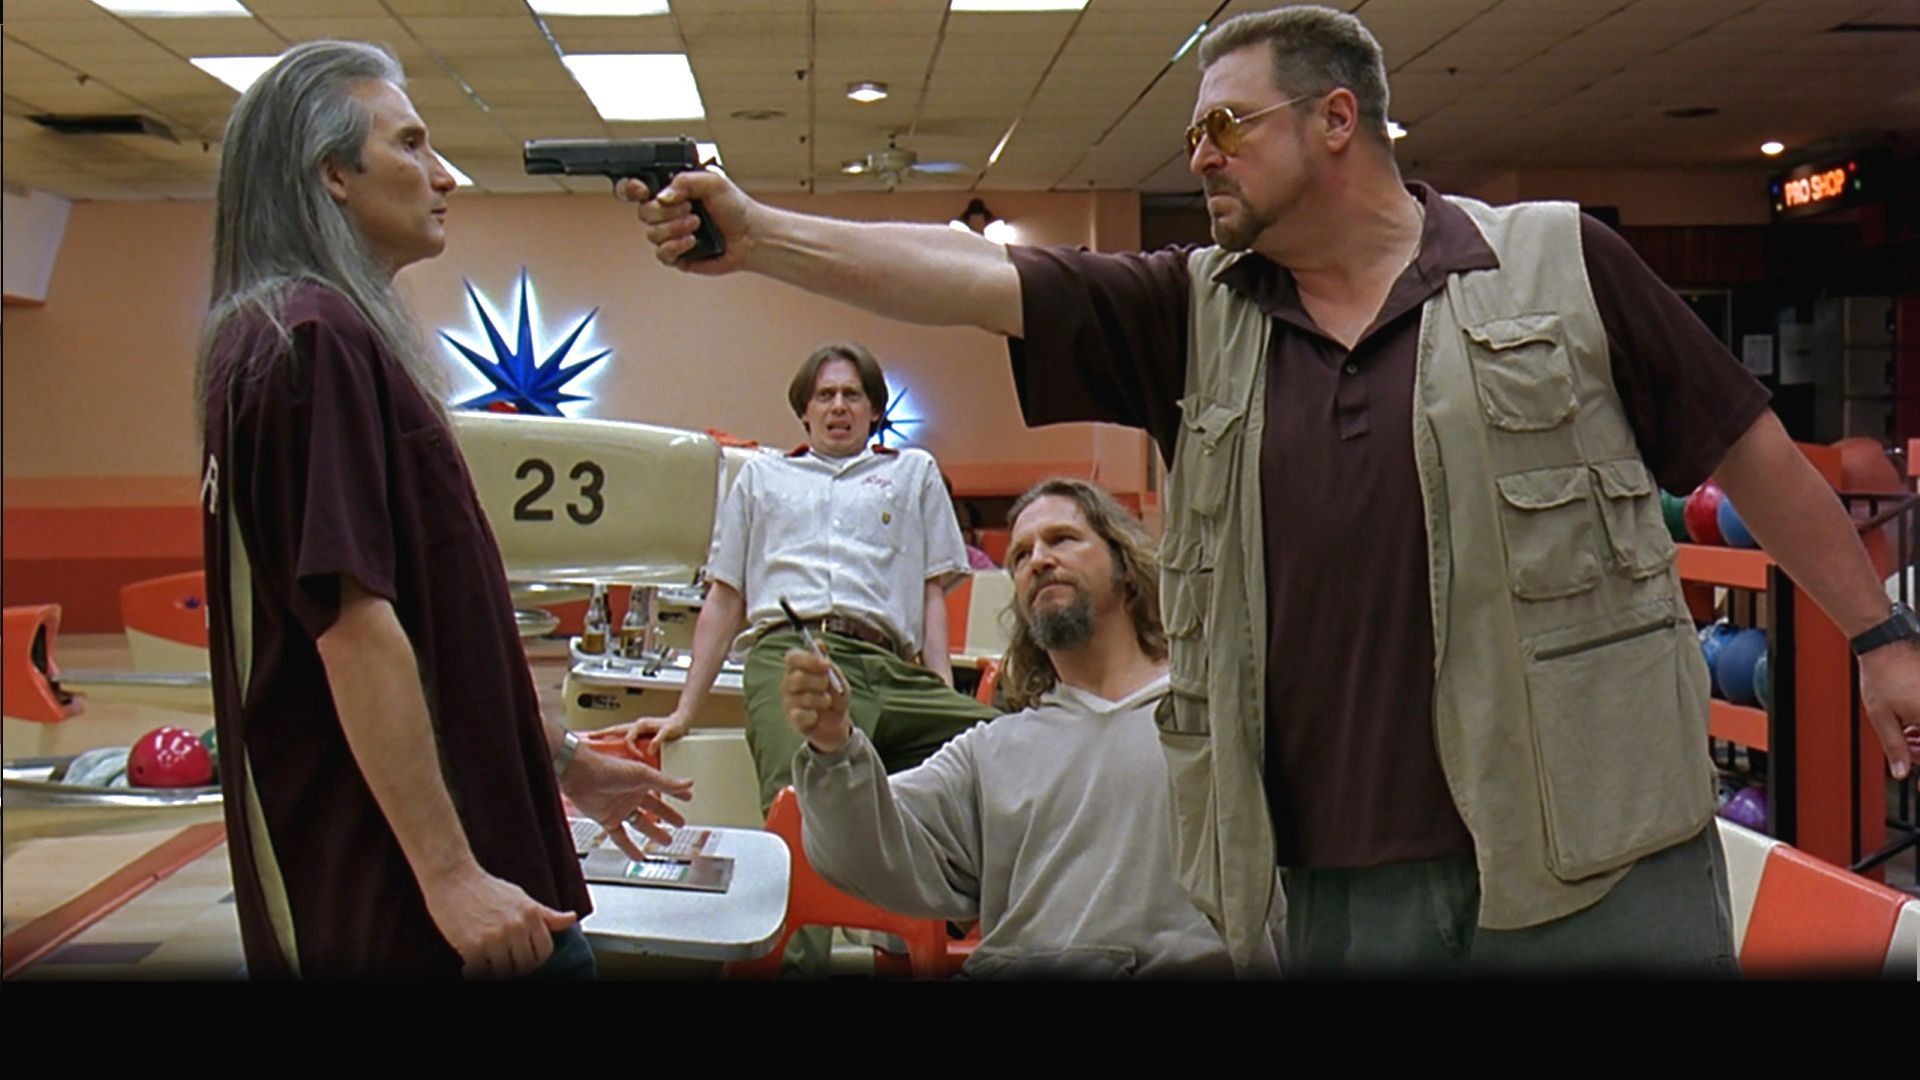 1920x1080 The Big Lebowski 18419 Hd Wallpapers in Movies - Imagesci.com